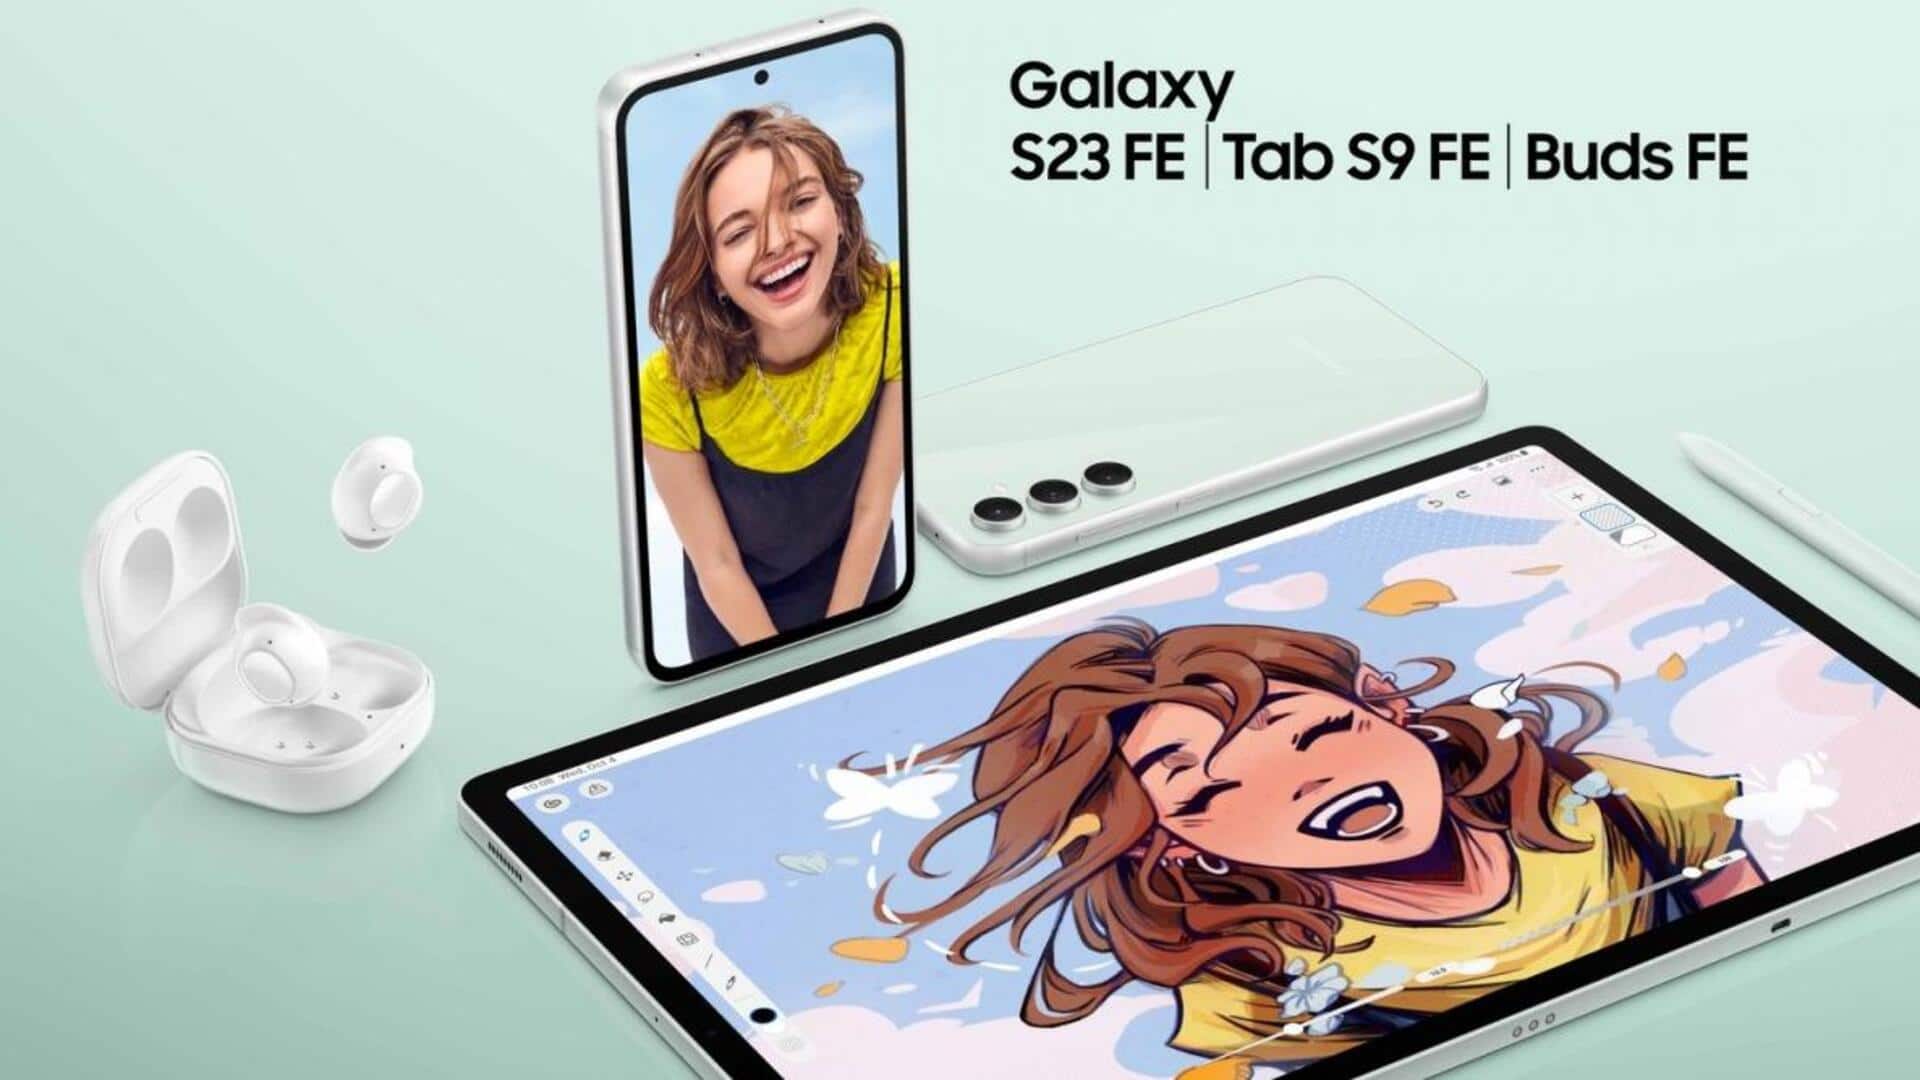 Samsung announces Tab S9 FE, Buds FE: See full specs